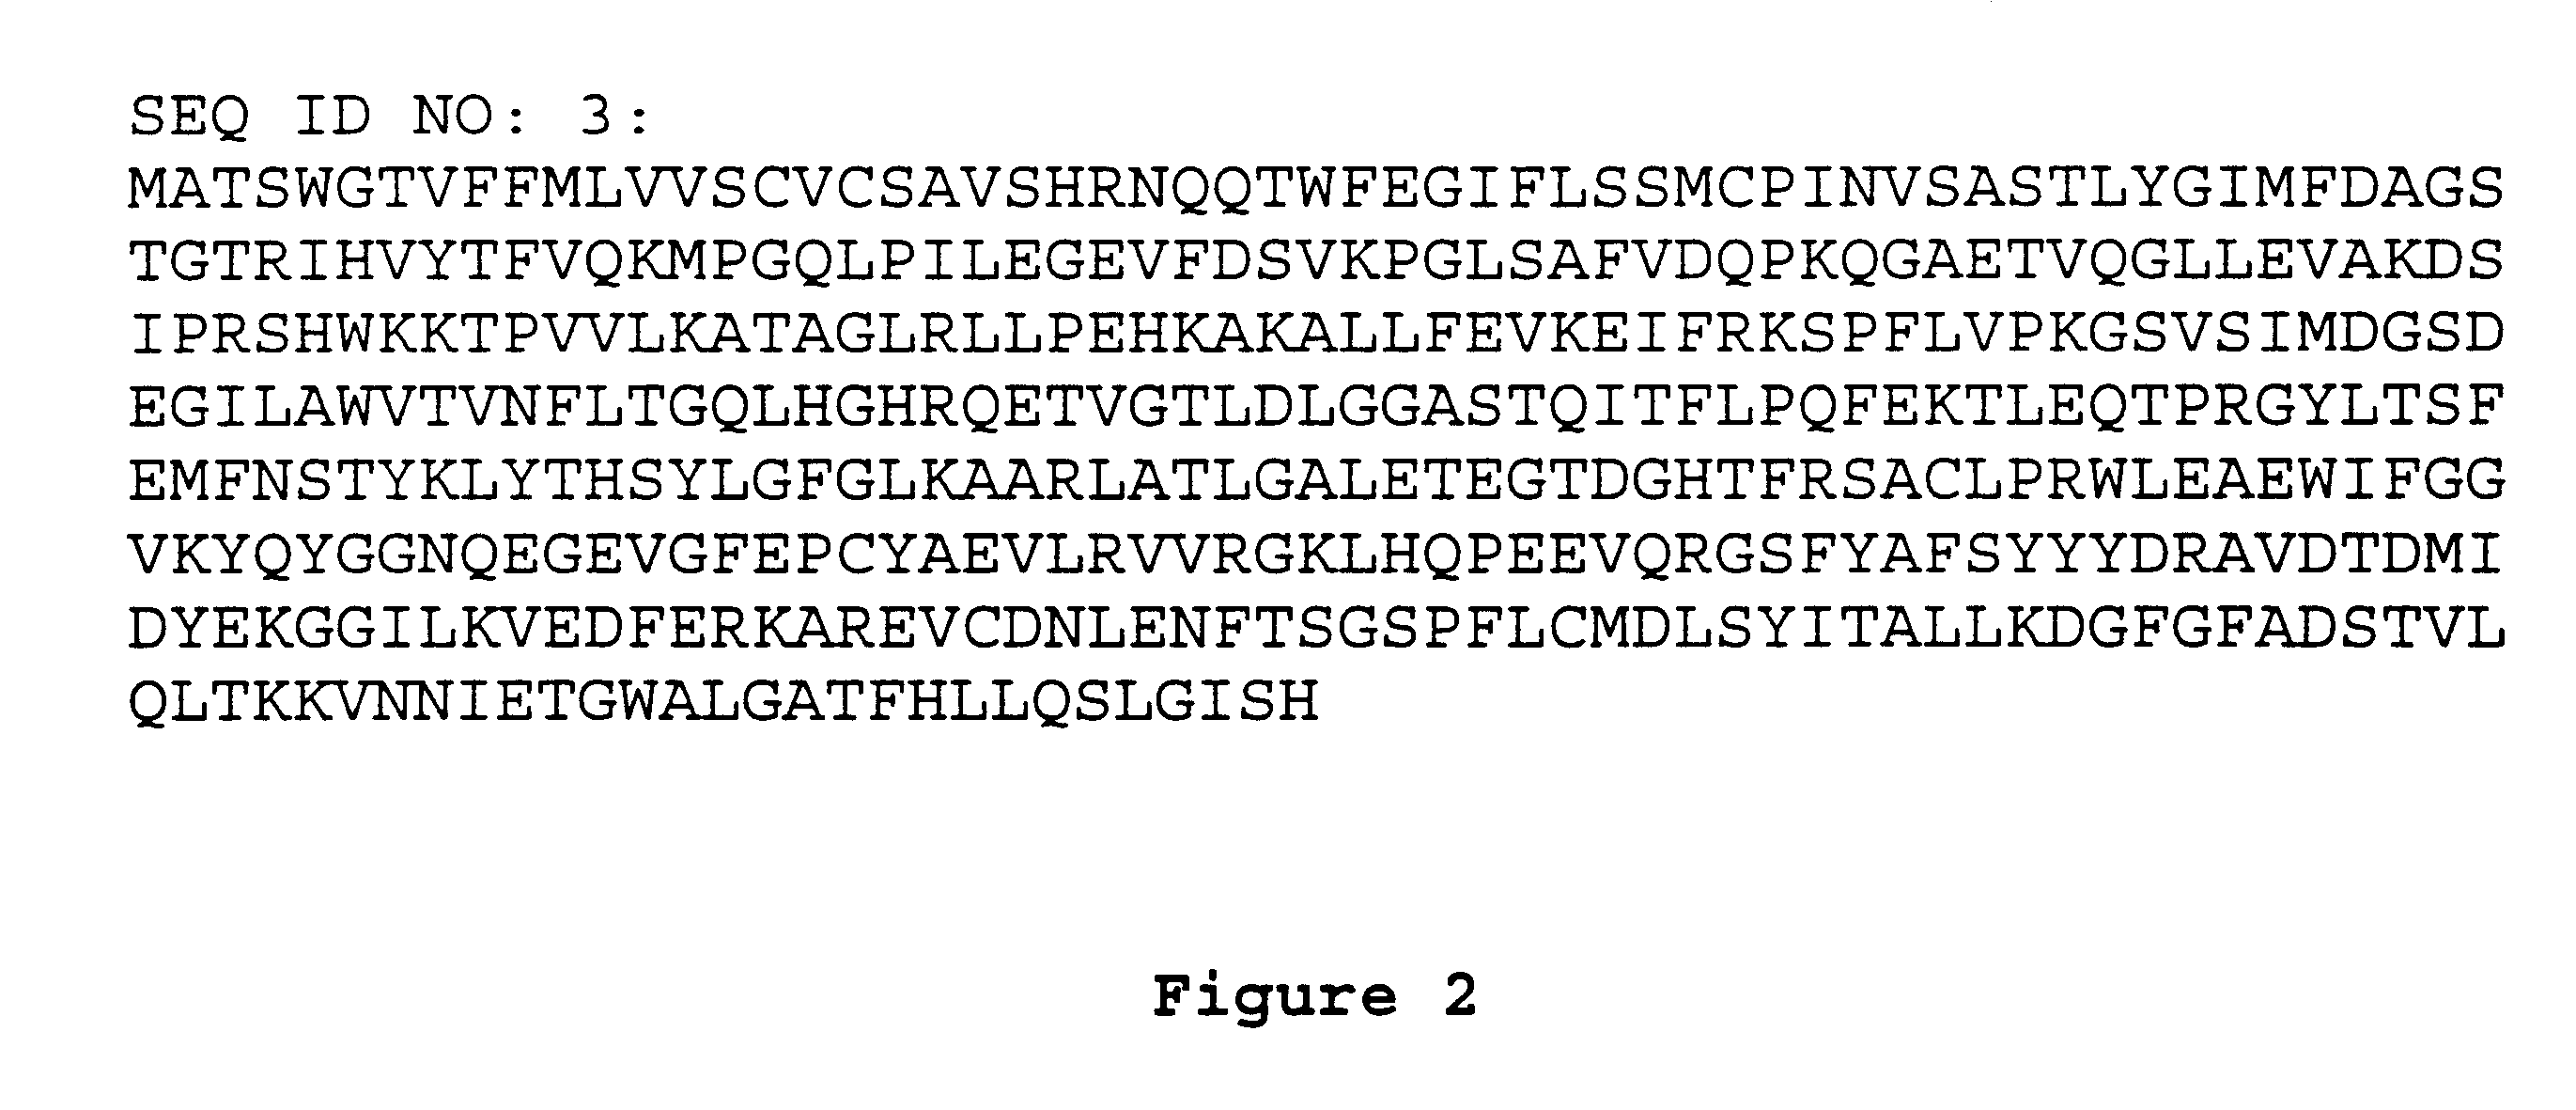 Methods and materials relating to CD39-like polypeptides